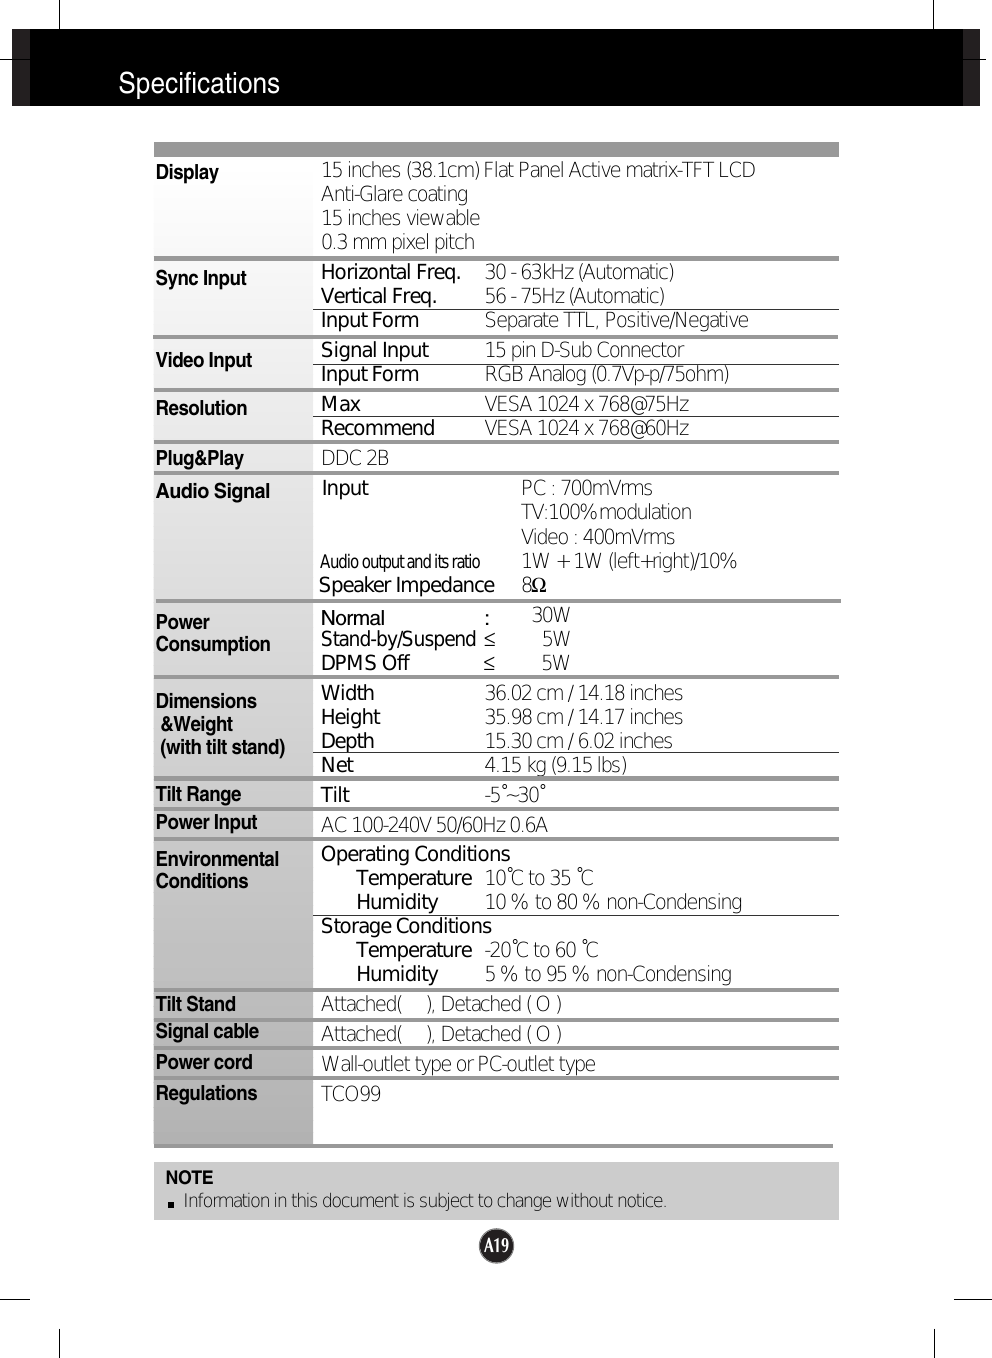 A19SpecificationsNOTEInformation in this document is subject to change without notice.15 inches (38.1cm) Flat Panel Active matrix-TFT LCD Anti-Glare coating15 inches viewable0.3 mm pixel pitchHorizontal Freq. 30 - 63kHz (Automatic)Vertical Freq. 56 - 75Hz (Automatic)Input Form Separate TTL, Positive/NegativeSignal Input 15 pin D-Sub ConnectorInput Form RGB Analog (0.7Vp-p/75ohm)Max VESA 1024 x 768@75Hz Recommend VESA 1024 x 768@60HzDDC 2BInput PC : 700mVrmsTV:100%modulationVideo : 400mVrmsAudio output and its ratio1W + 1W (left+right)/10%Speaker Impedance 8ΩNormal :30WStand-by/Suspend≤5WDPMS Off ≤ 5WWidth 36.02 cm / 14.18 inchesHeight 35.98 cm / 14.17 inchesDepth 15.30 cm / 6.02 inchesNet 4.15 kg (9.15 lbs)Tilt -5˚~30˚AC 100-240V 50/60Hz 0.6AOperating ConditionsTemperature 10˚C to 35 ˚CHumidity 10 % to 80 % non-CondensingStorage ConditionsTemperature -20˚C to 60 ˚CHumidity 5 % to 95 % non-CondensingAttached(     ), Detached ( O )Attached(     ), Detached ( O )Wall-outlet type or PC-outlet typeTCO99DisplaySync InputVideo InputResolutionPlug&amp;PlayAudio SignalPowerConsumptionDimensions&amp;Weight(with tilt stand)Tilt RangePower InputEnvironmentalConditionsTilt StandSignal cablePower cord Regulations